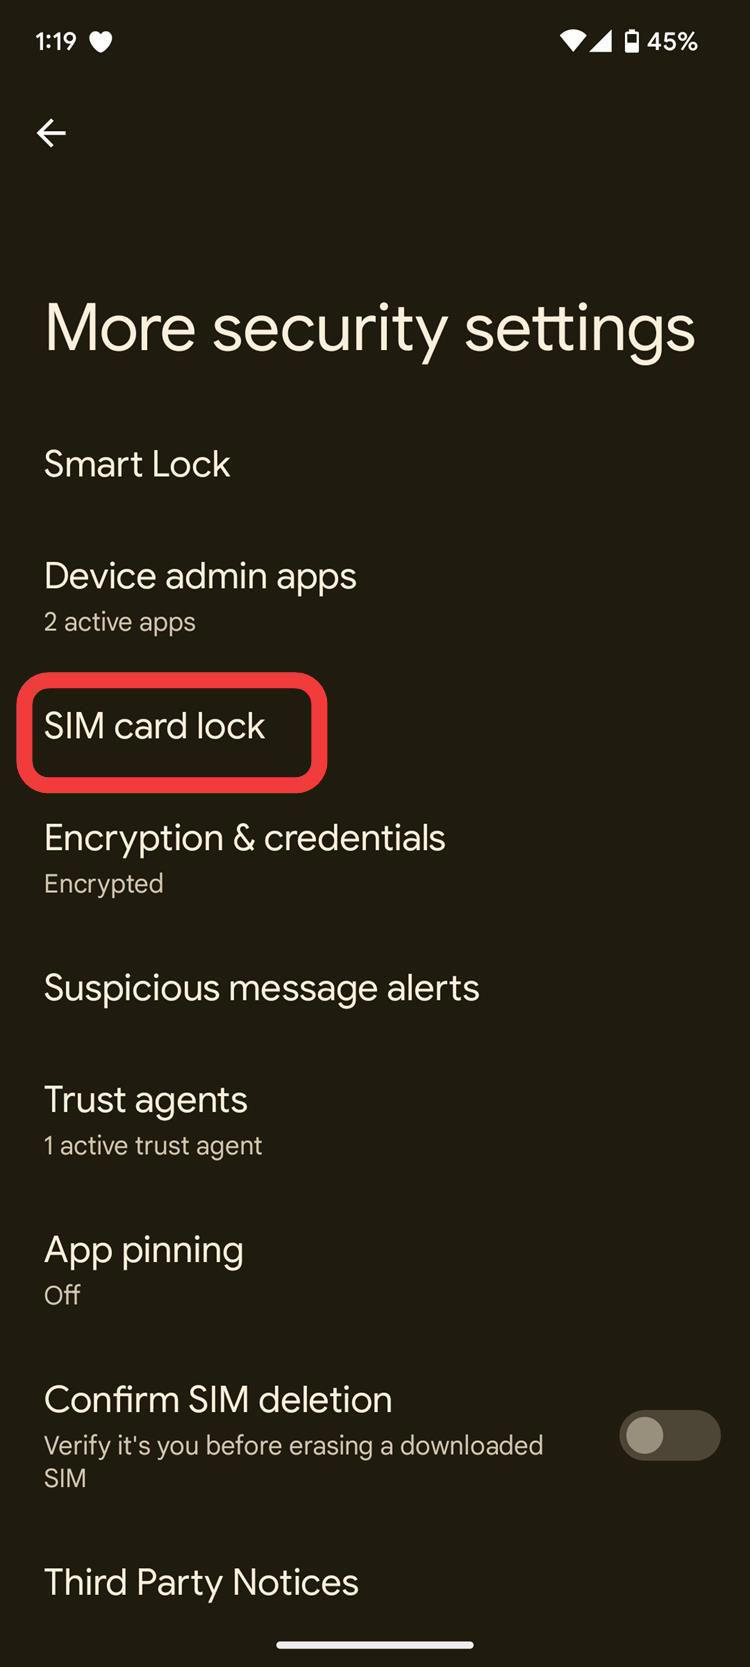 More security settings on a Pixel phone with a red box around the SIM card lock option